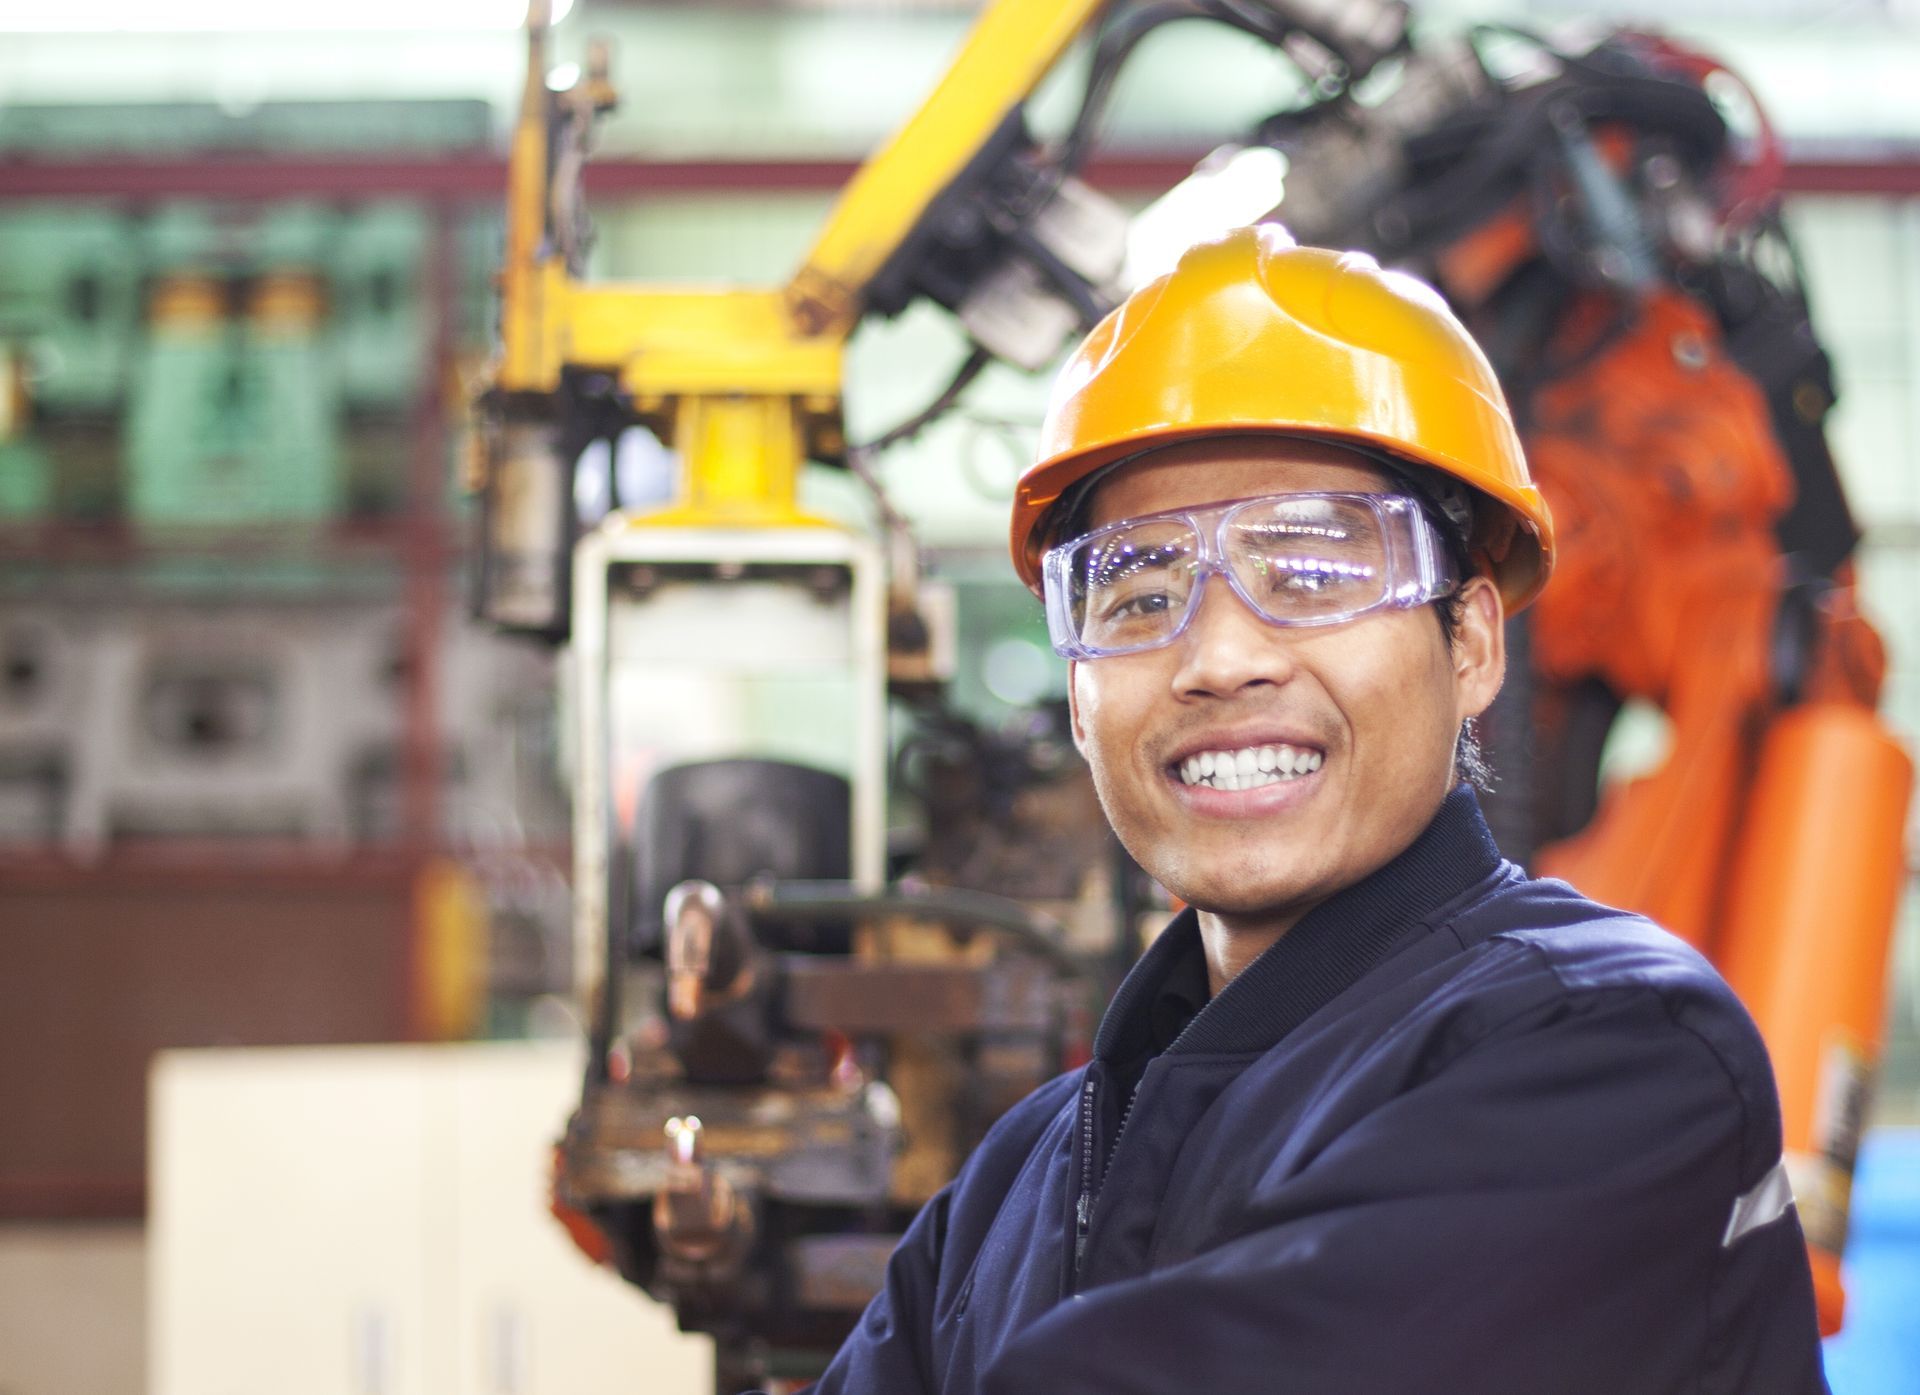 A man wearing a hard hat and safety glasses is working in manufacturing